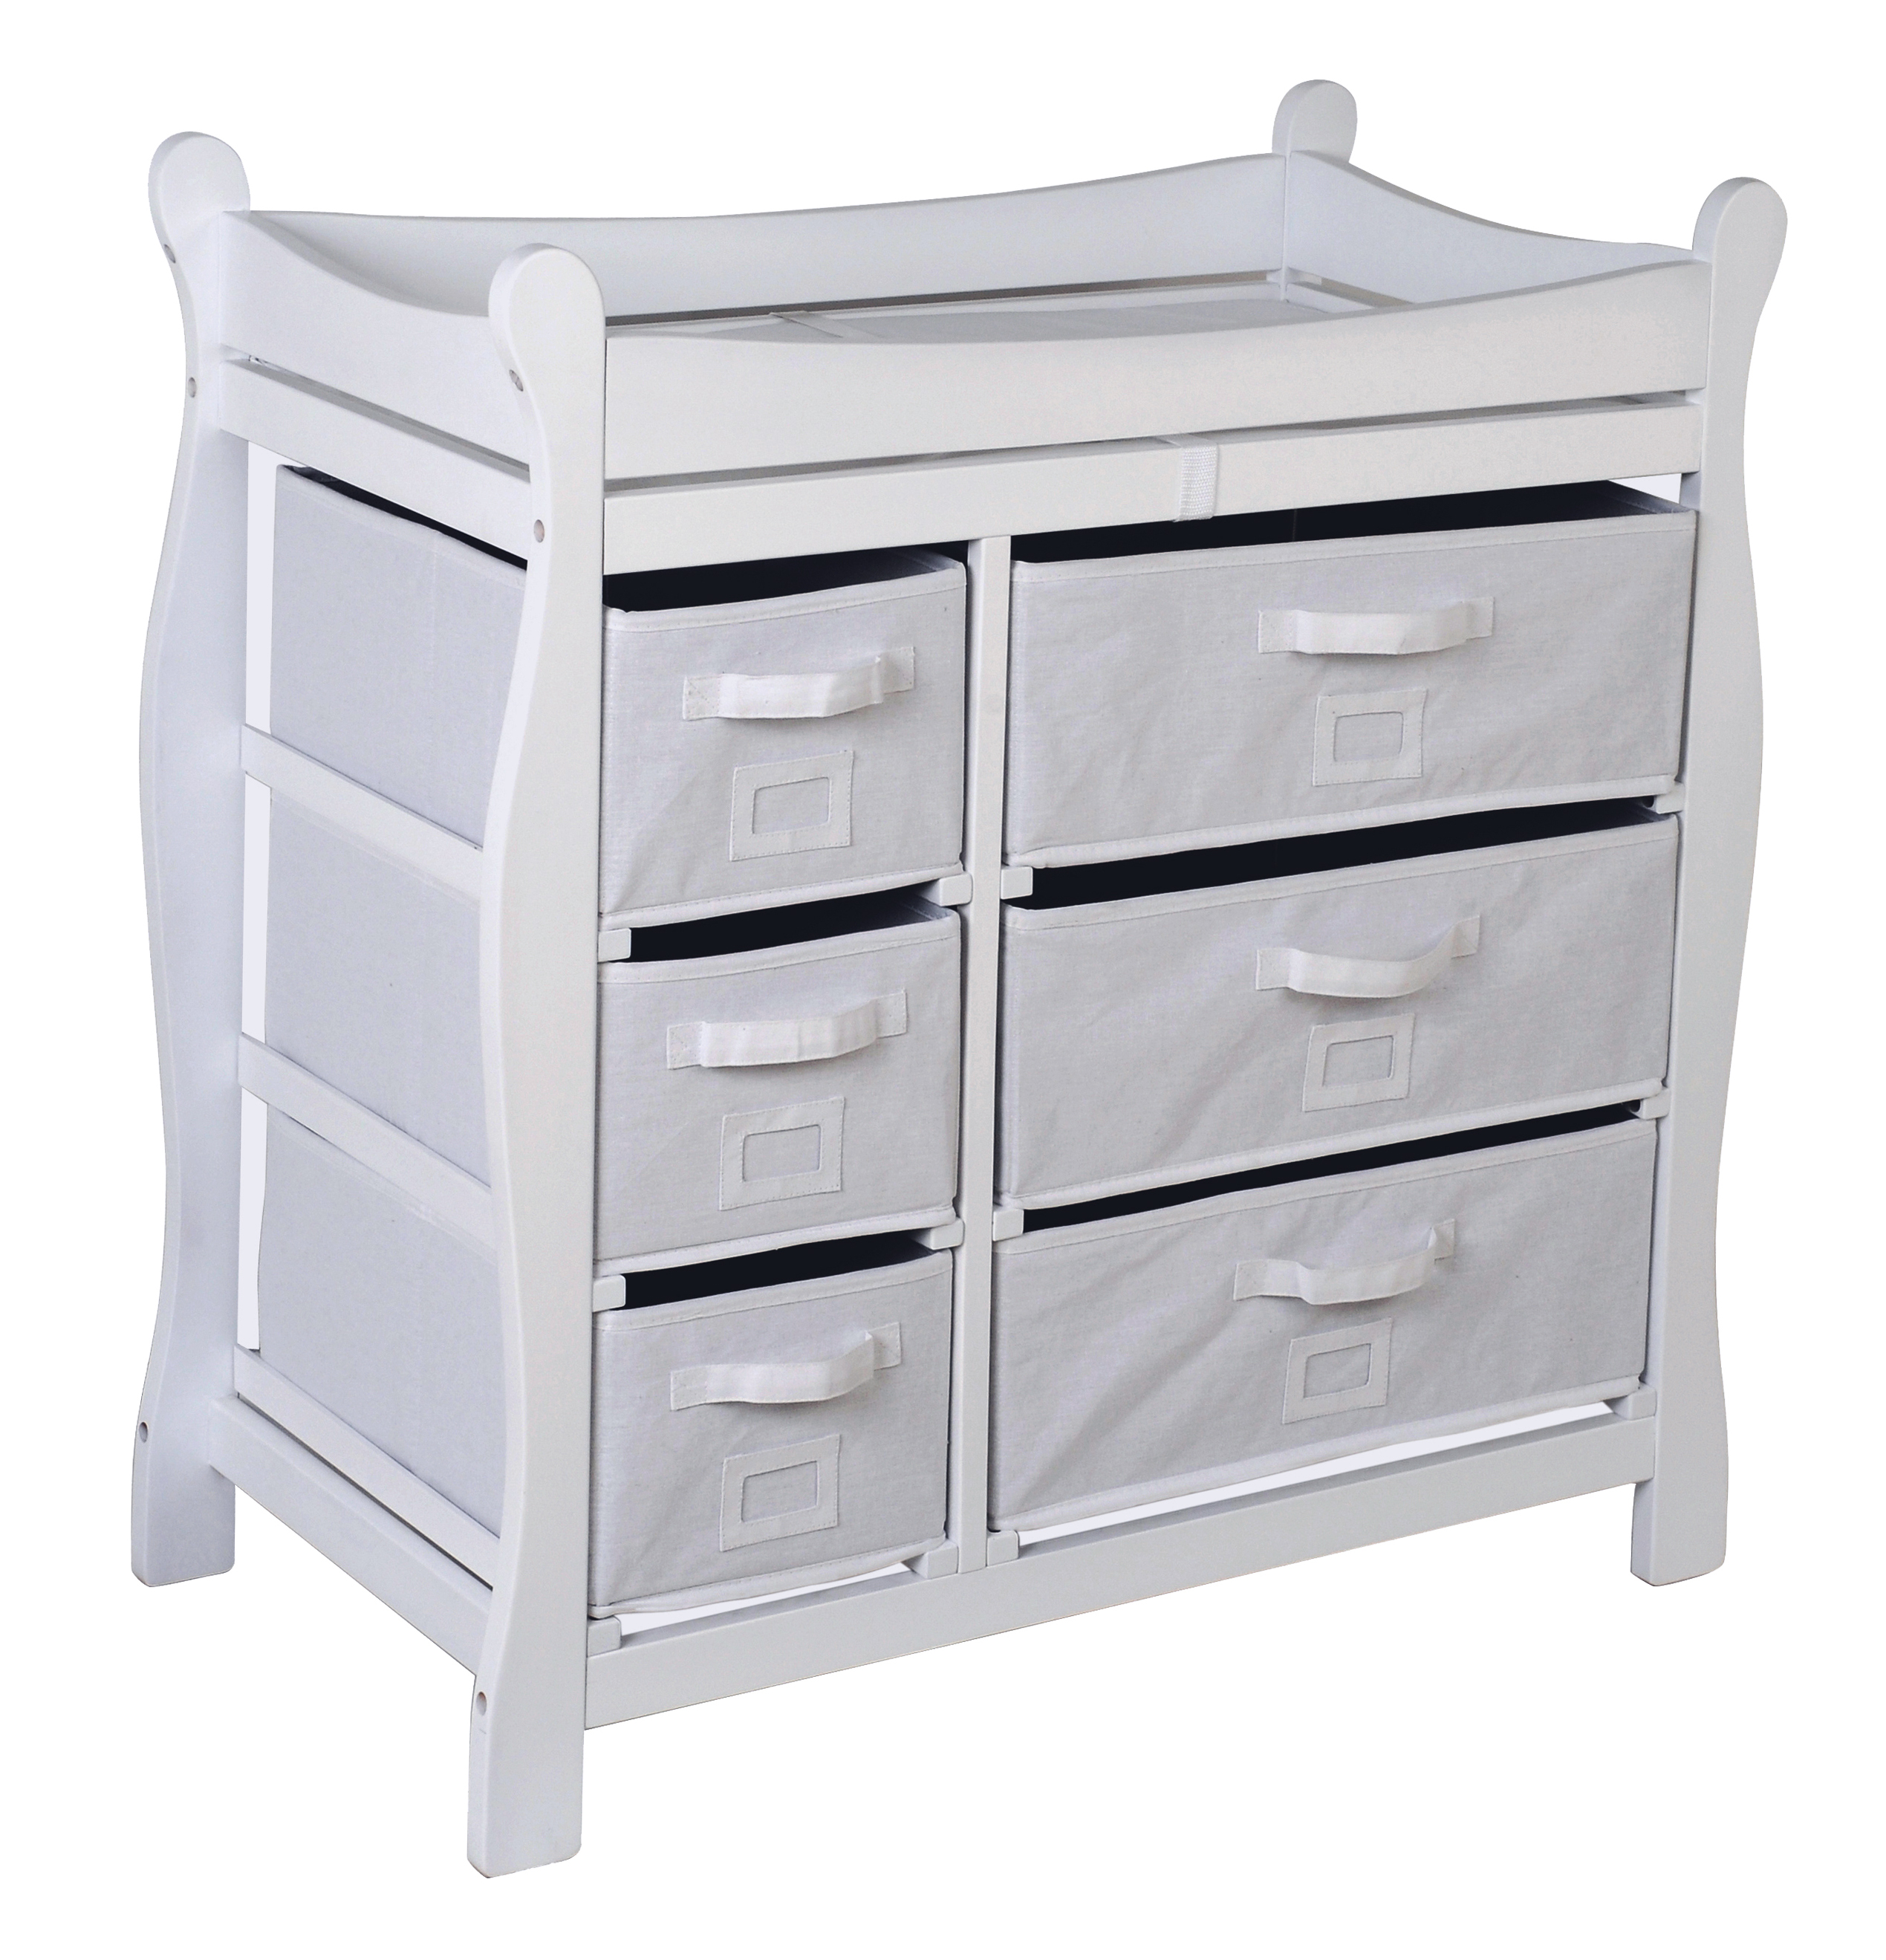 Sleigh Style Baby Changing Table with 6 Baskets - White